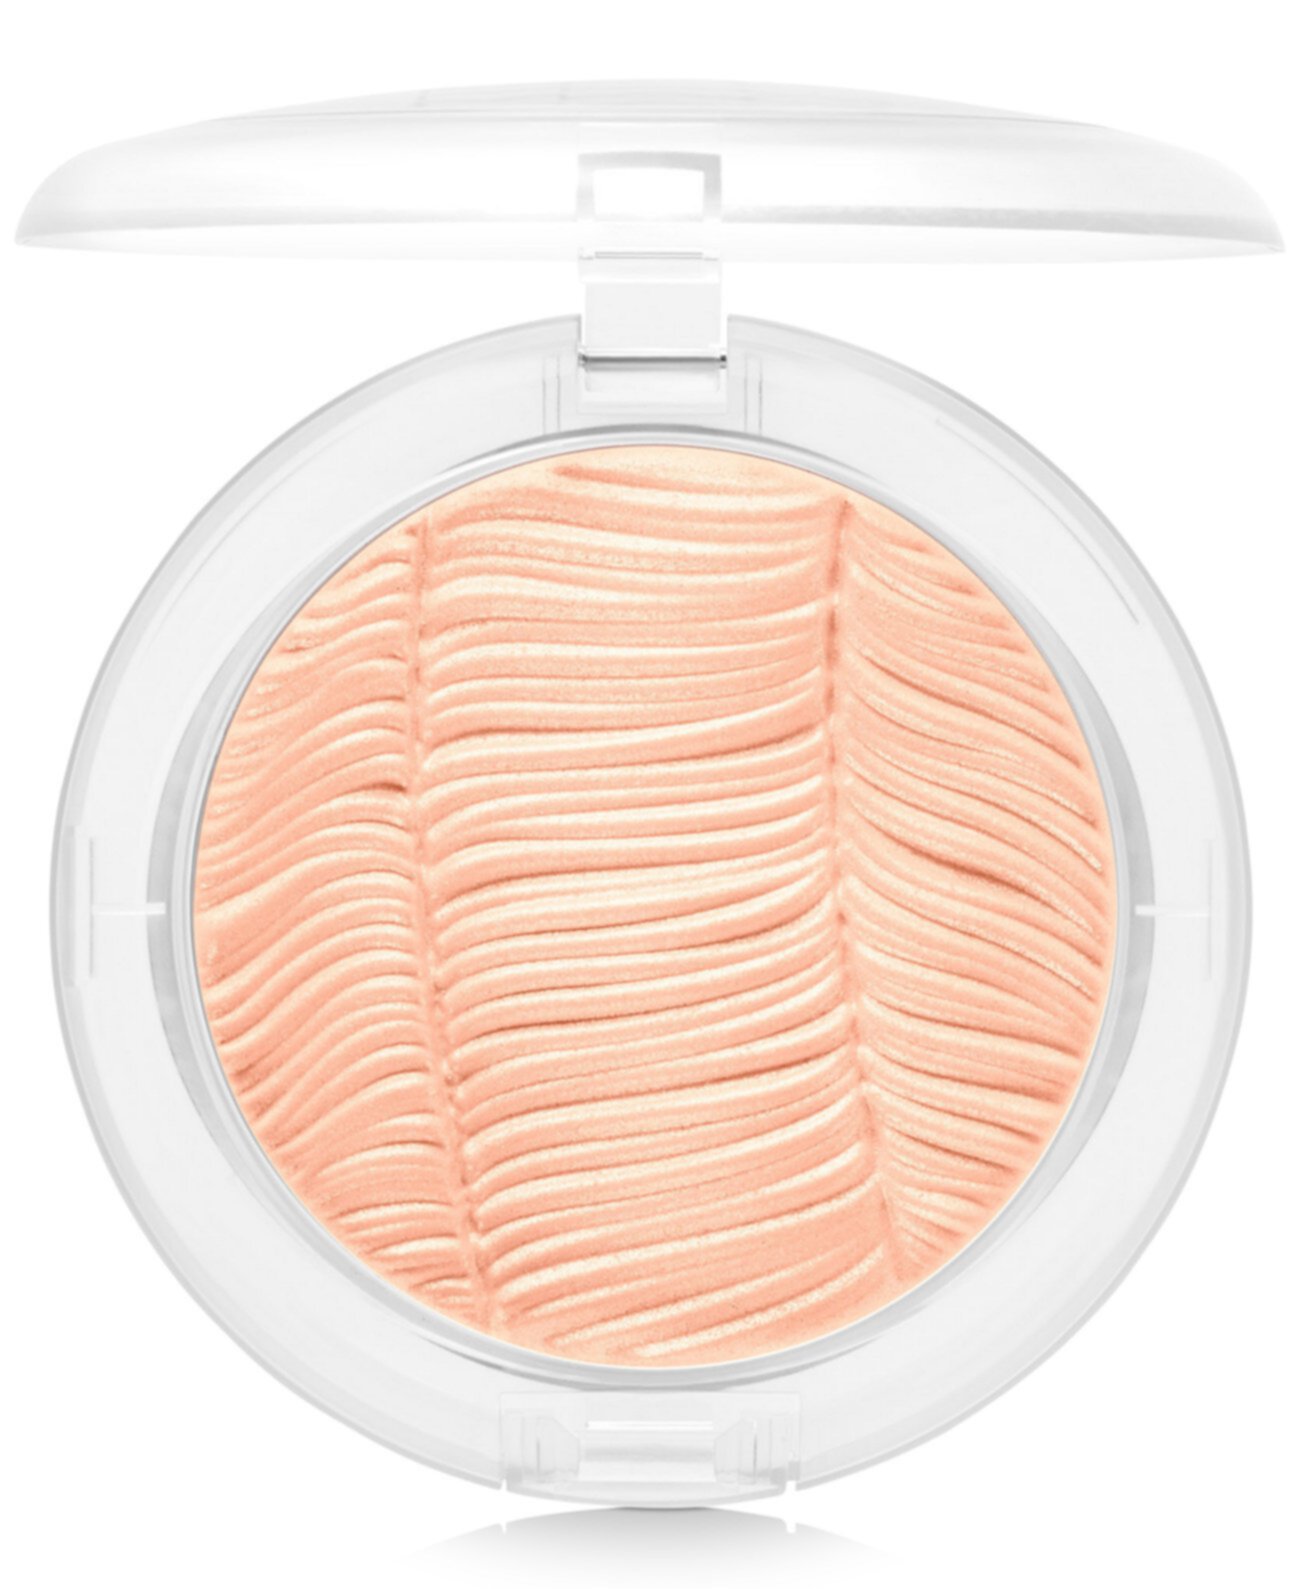 Loud & Clear Extra Dimension Skinfinish MAC Cosmetics